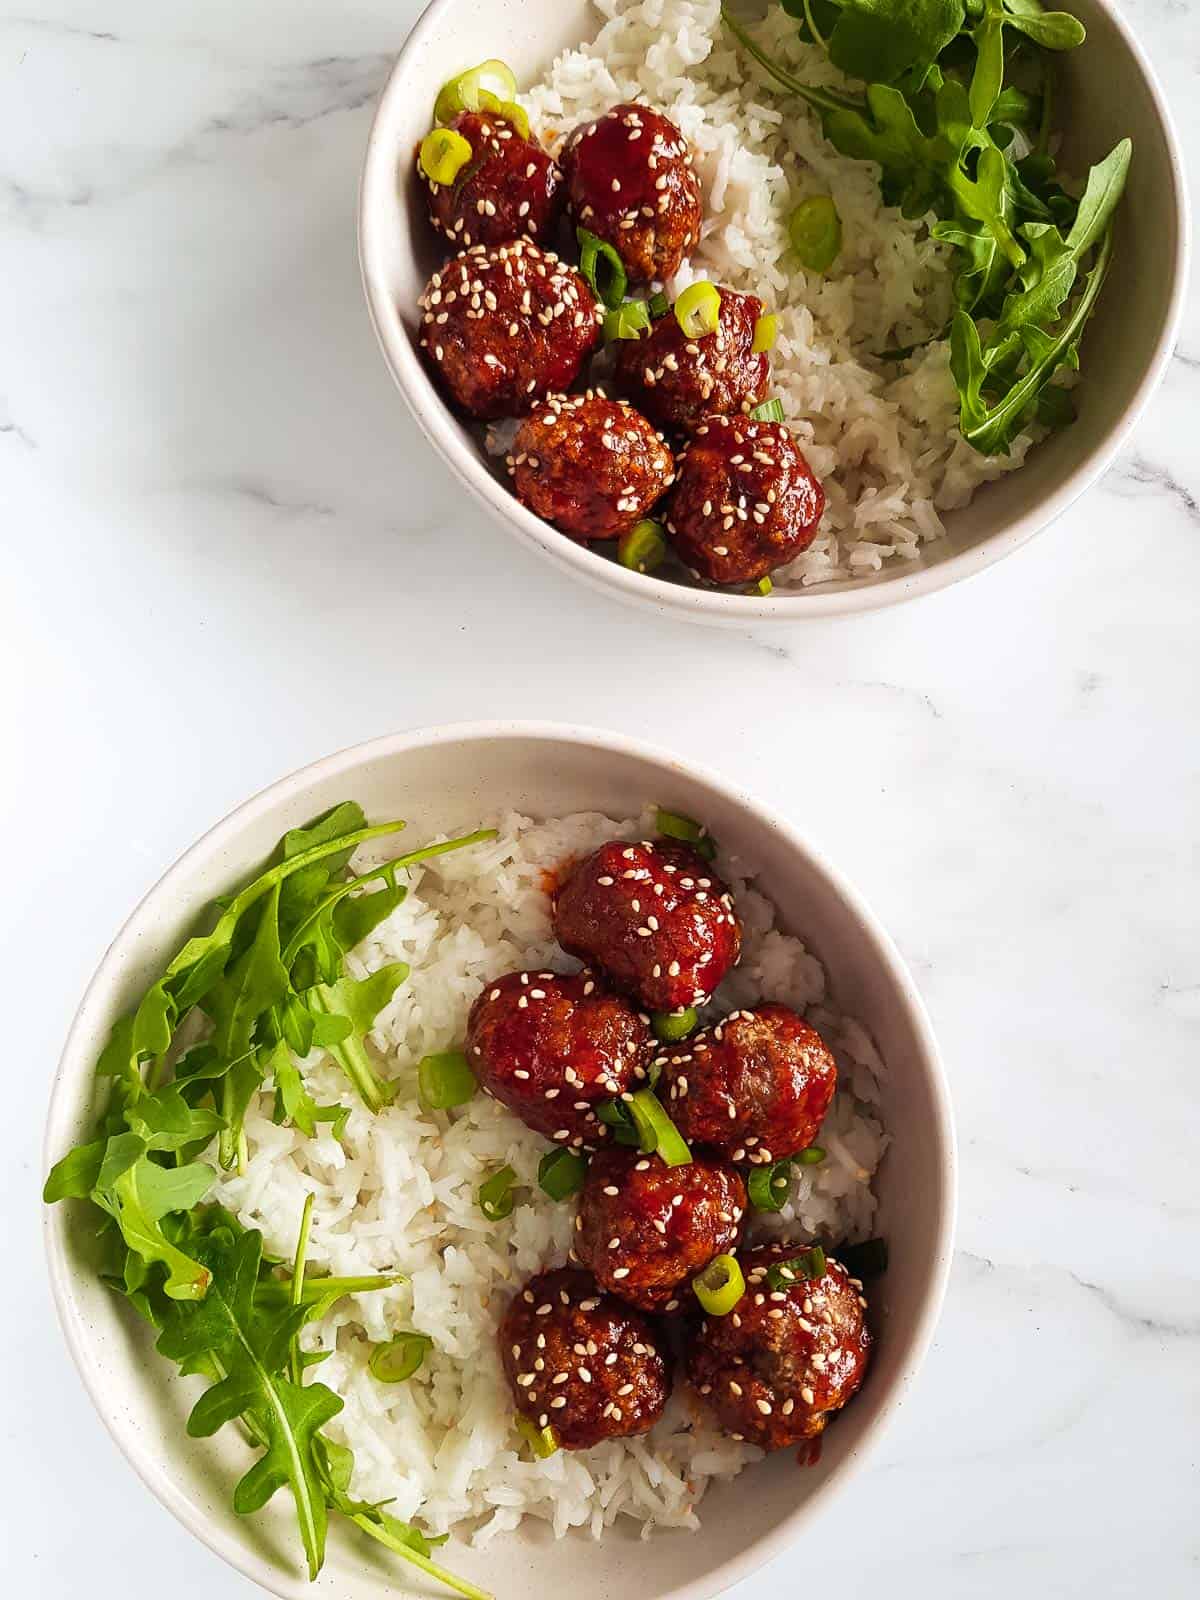 Two bowls of meatballs, rice and arugula.